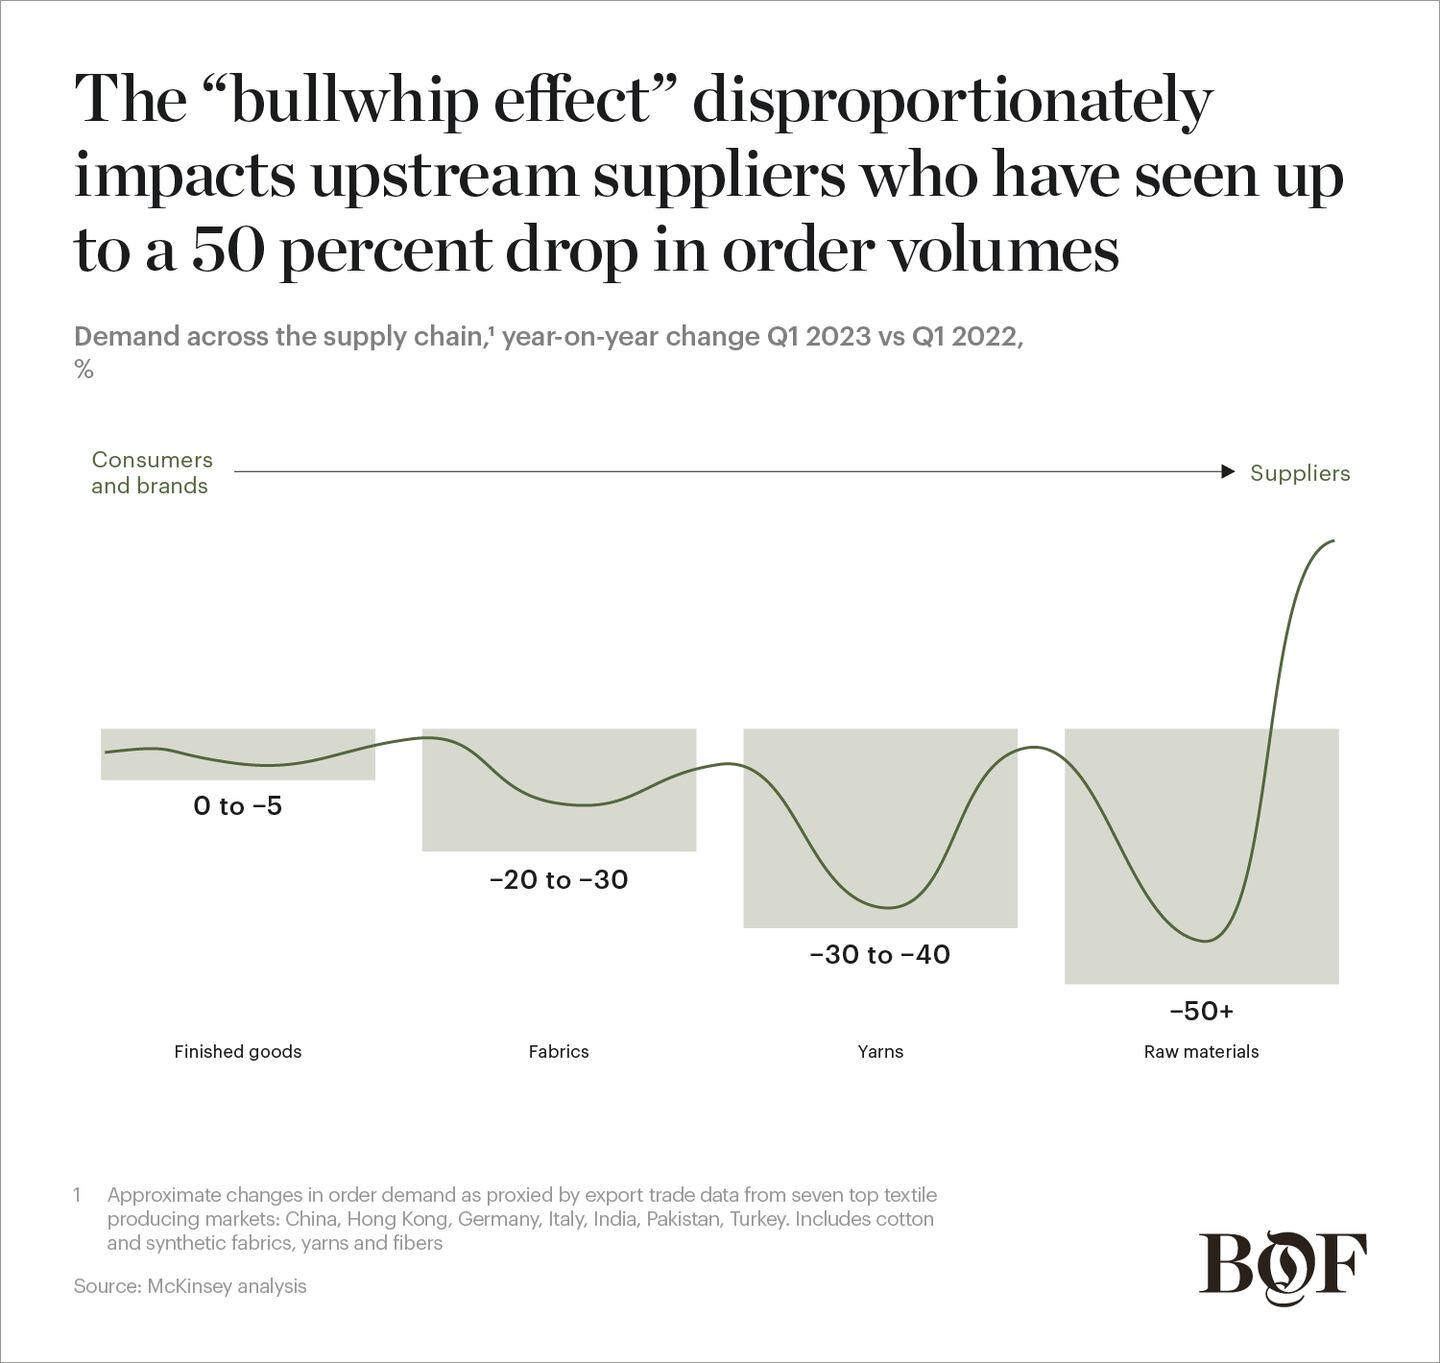 The “bullwhip effect” disproportionately impacts upstream suppliers
who have seen up to a 50 percent drop in order volumes